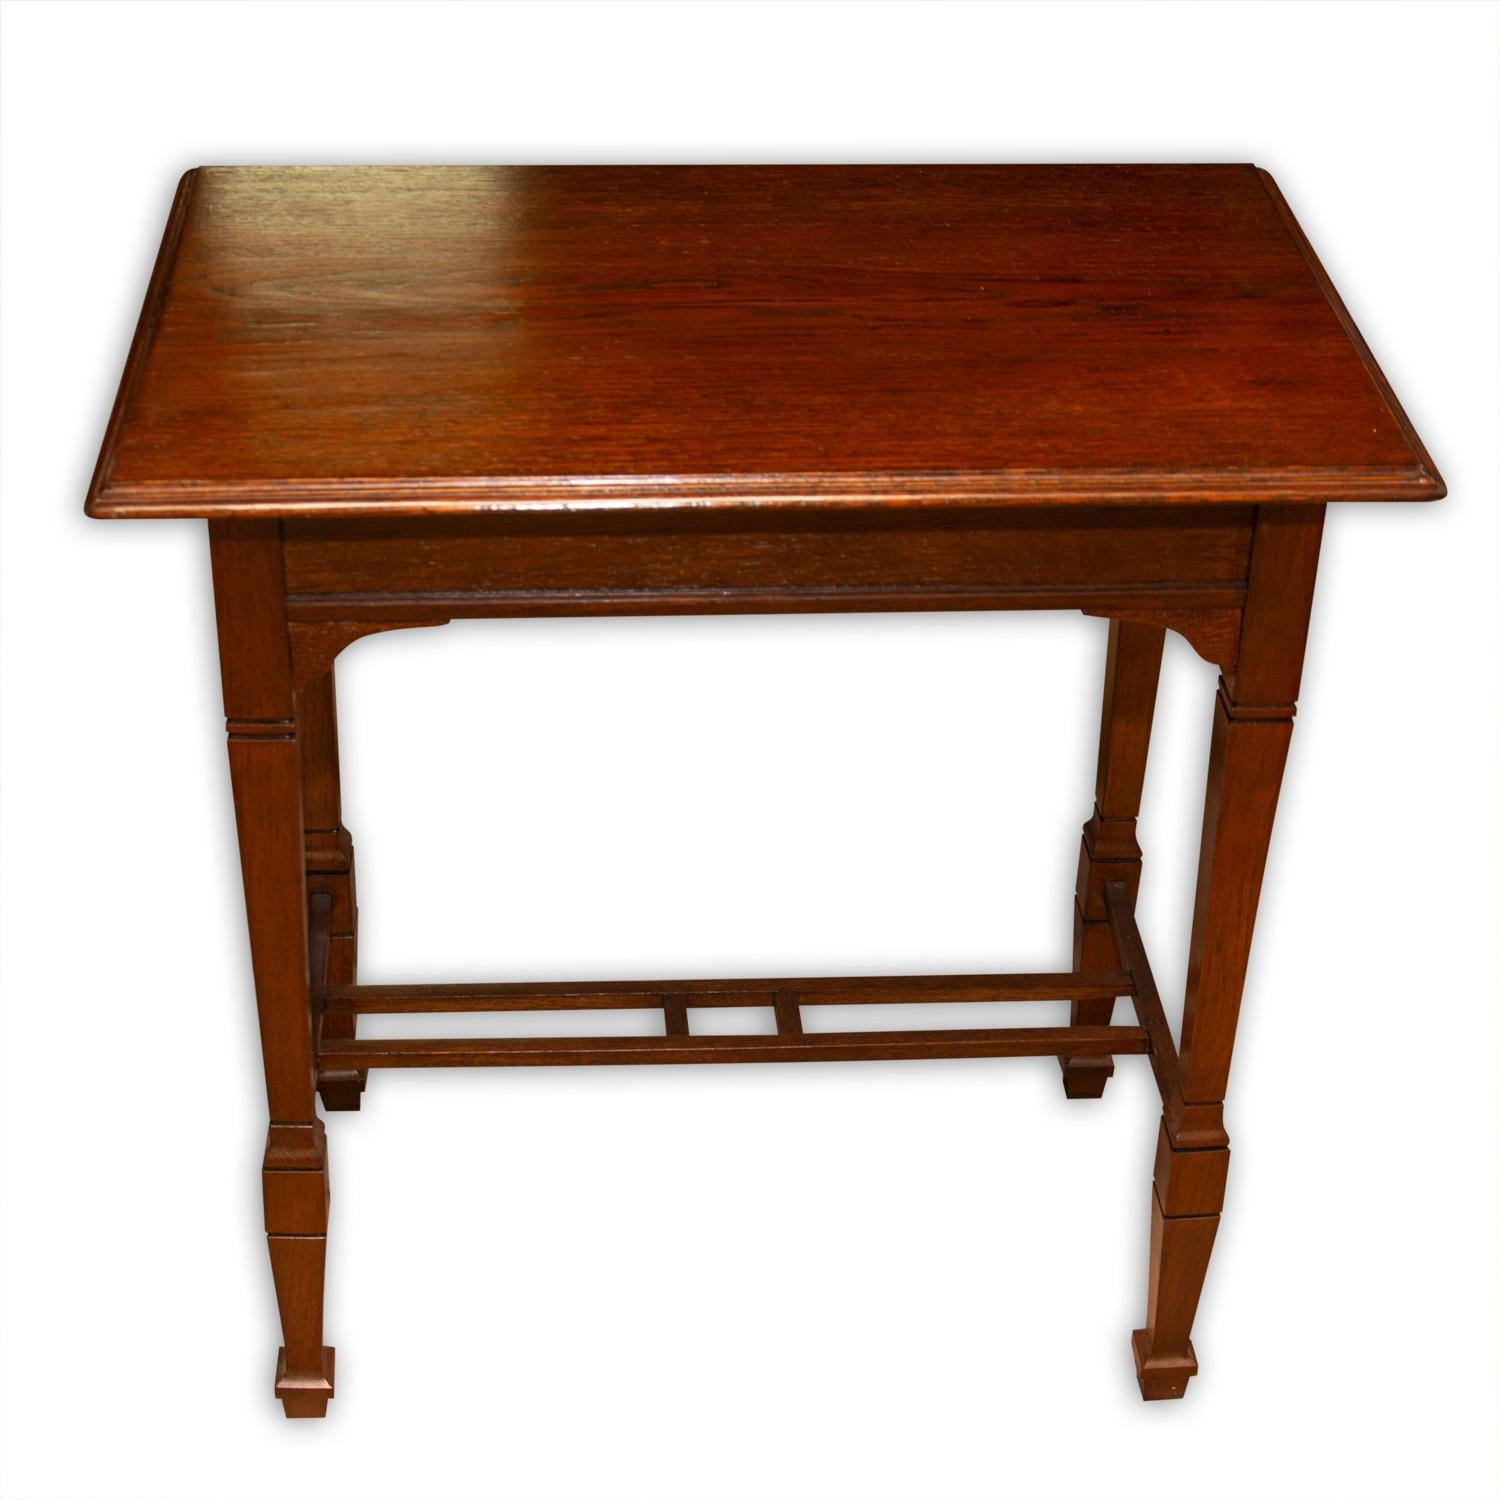 This occasional table was designed and produced in Austria-Hungary, circa 1915. It was made of oakwood. The table is completely refurbished and varnished.

Measures: Height 73 cm

Width: 70 cm

Depth: 45 cm.